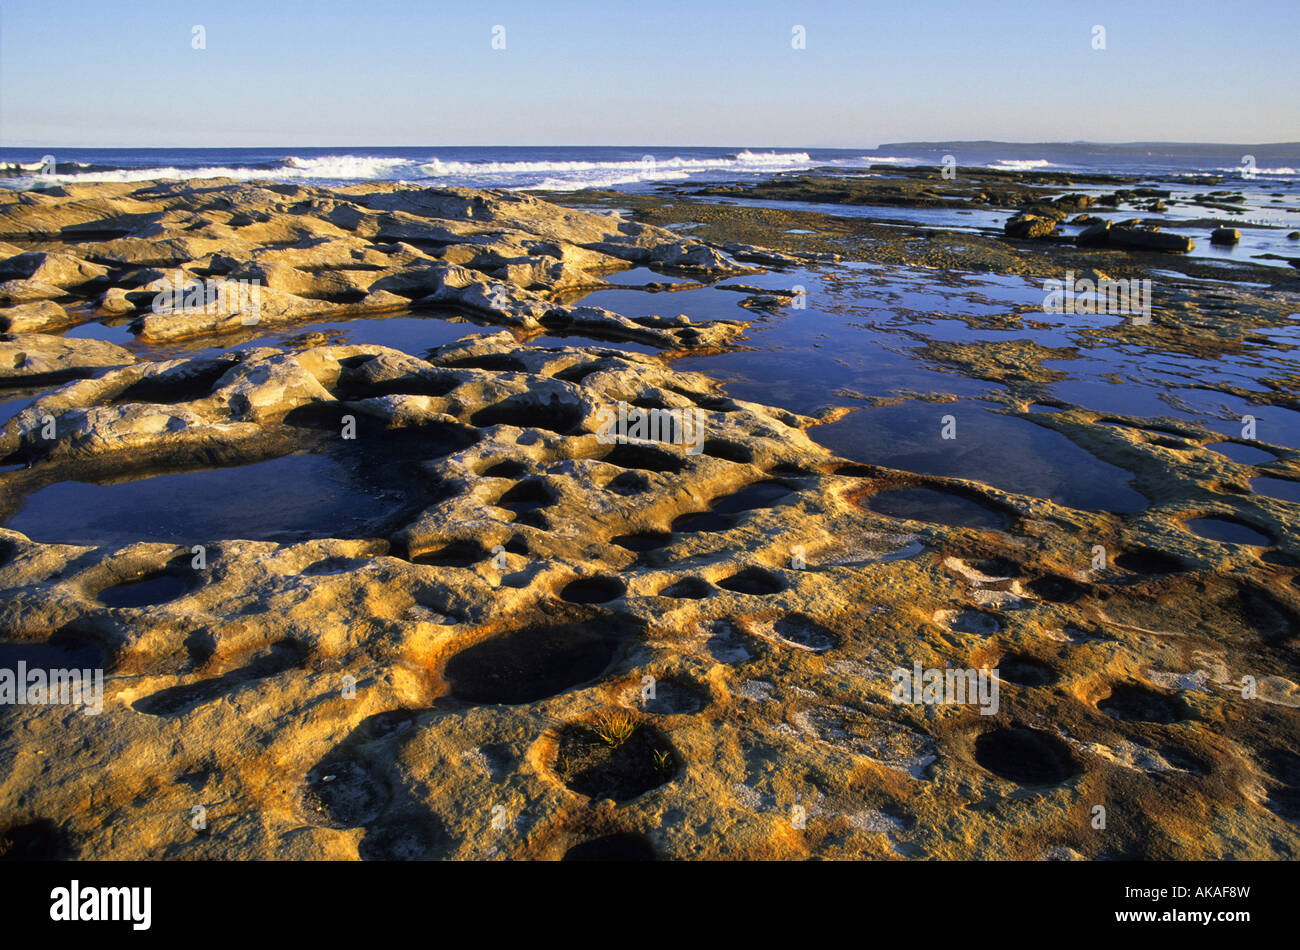 Natural rock formations on a beach at low tide Kunell NSW Australia Stock Photo